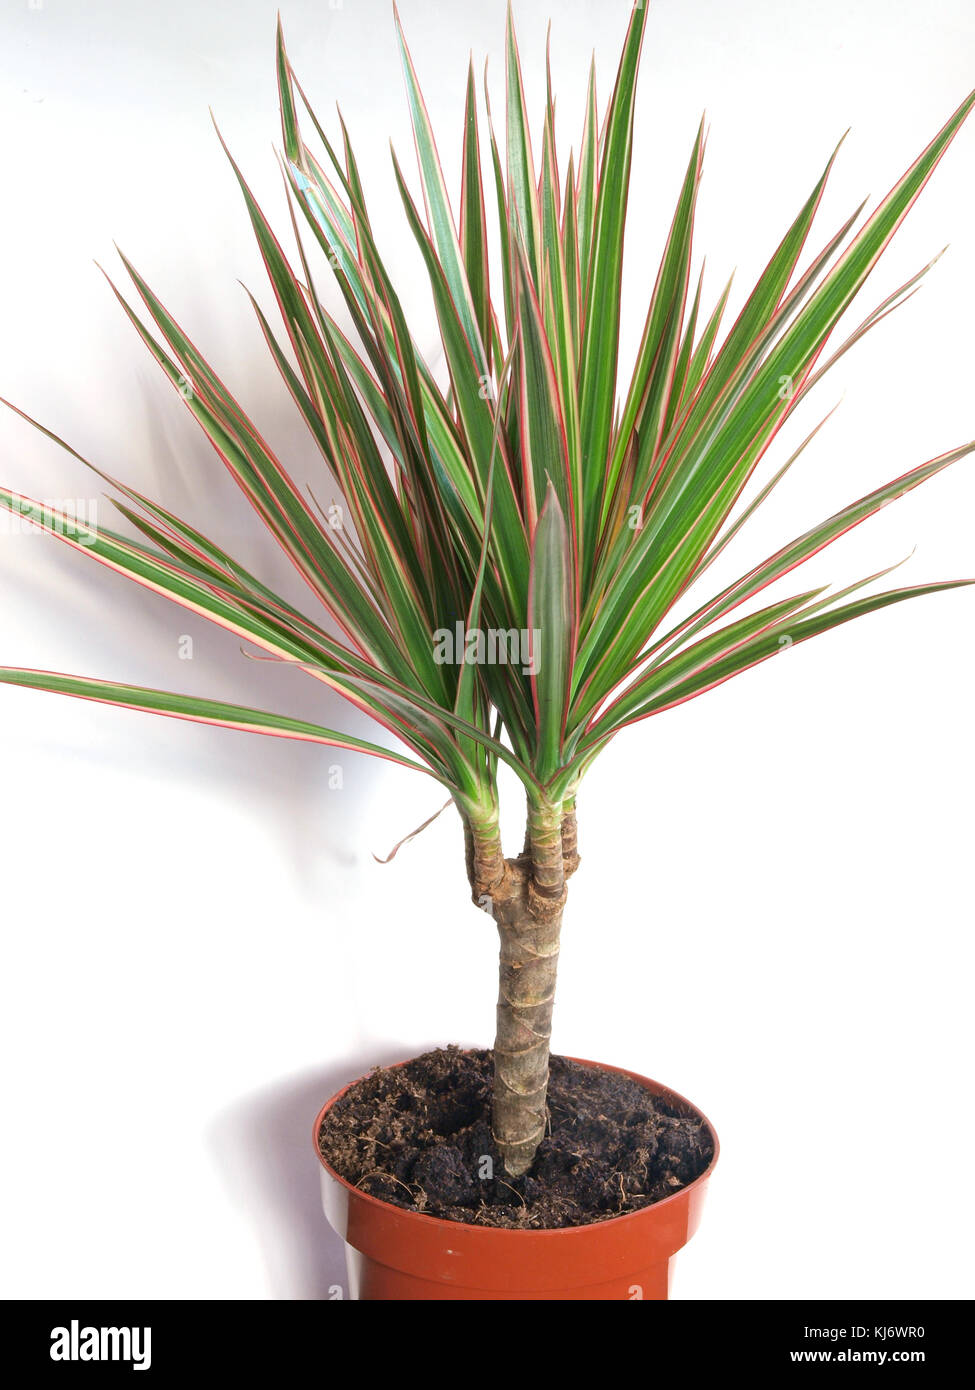 Slow growing flowering container plant dracaena marginata or red edged dracaena or Madagascar dragon tree in flower pot close up on white background. Stock Photo